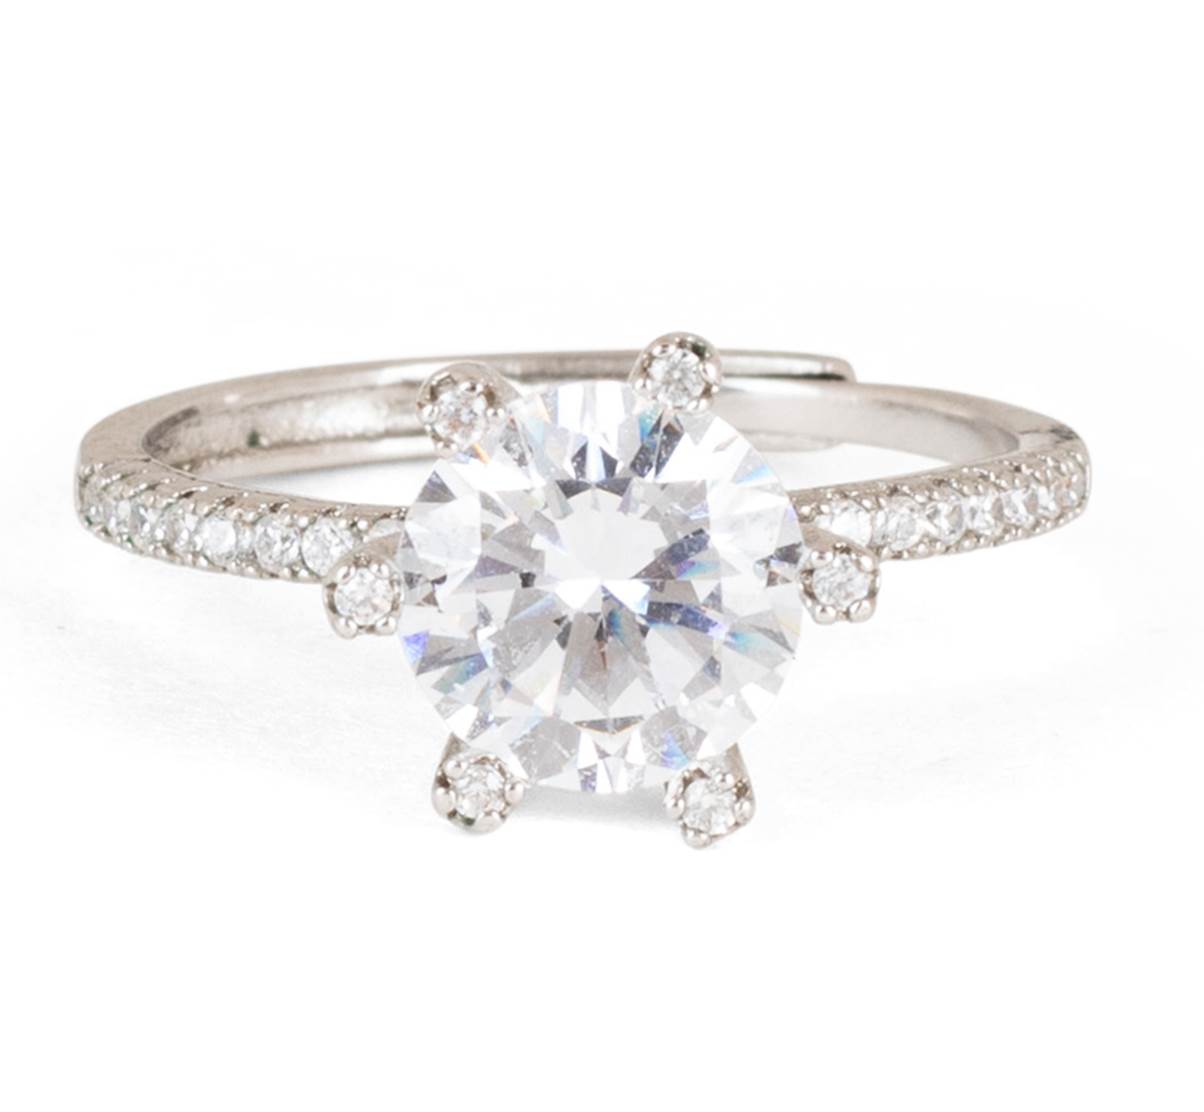 Leading Lady Solitaire Ring in Silver Rhodium Plating and CZ Stones (Adjustable)